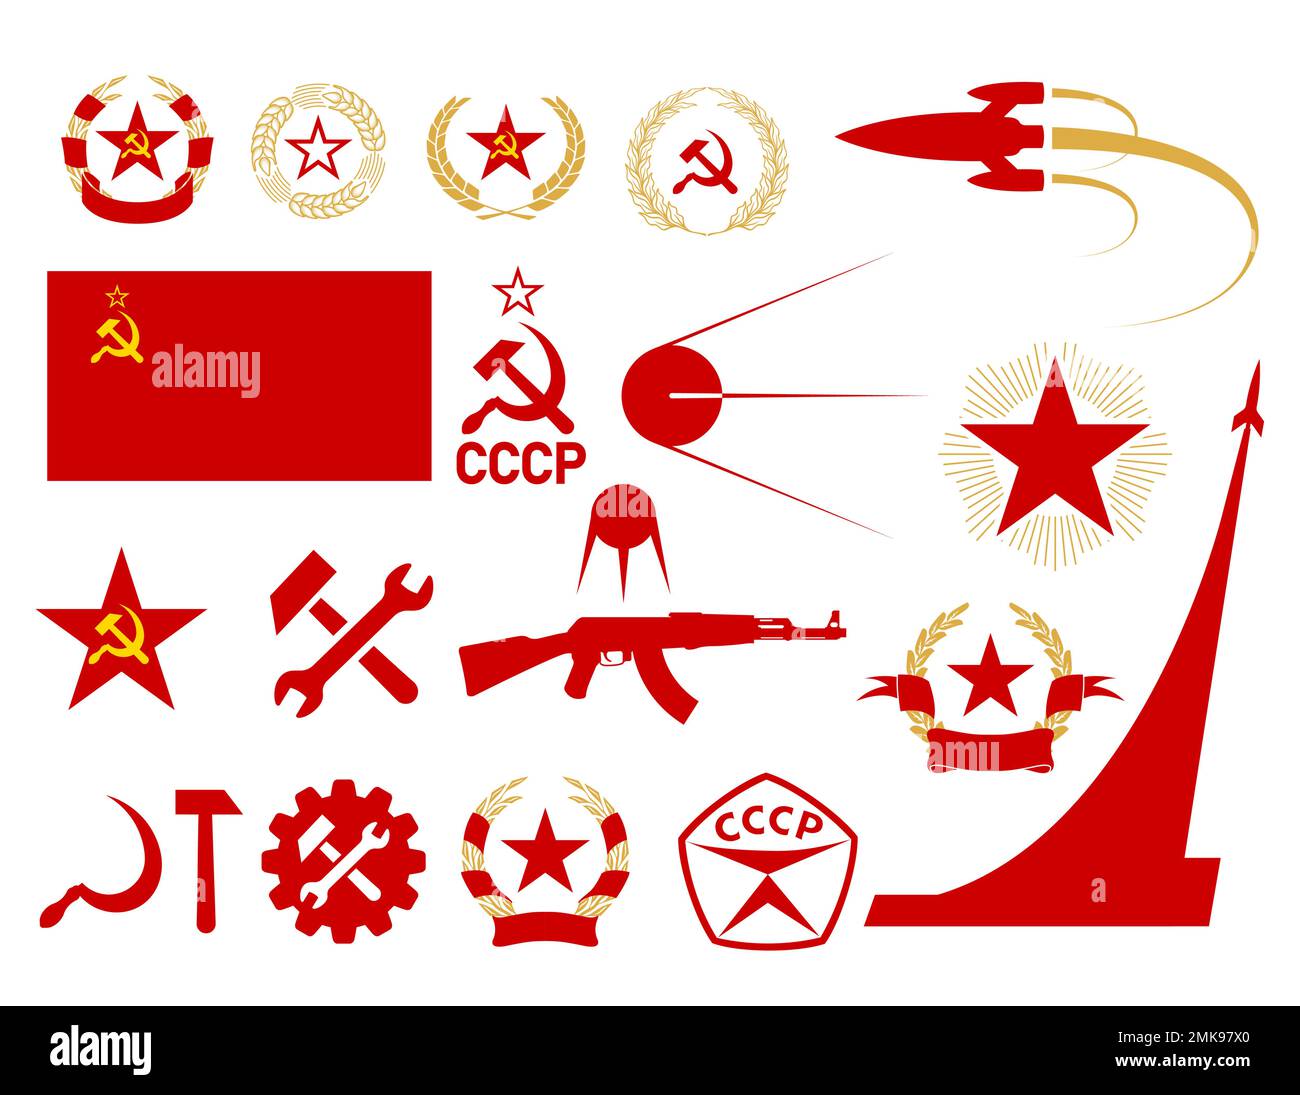 USSR symbolix, communism and socialism icons set, soviet emblems, star, hammer and sickle, USSR flag and star, wreath of wheat and laurel wreath, spac Stock Vector